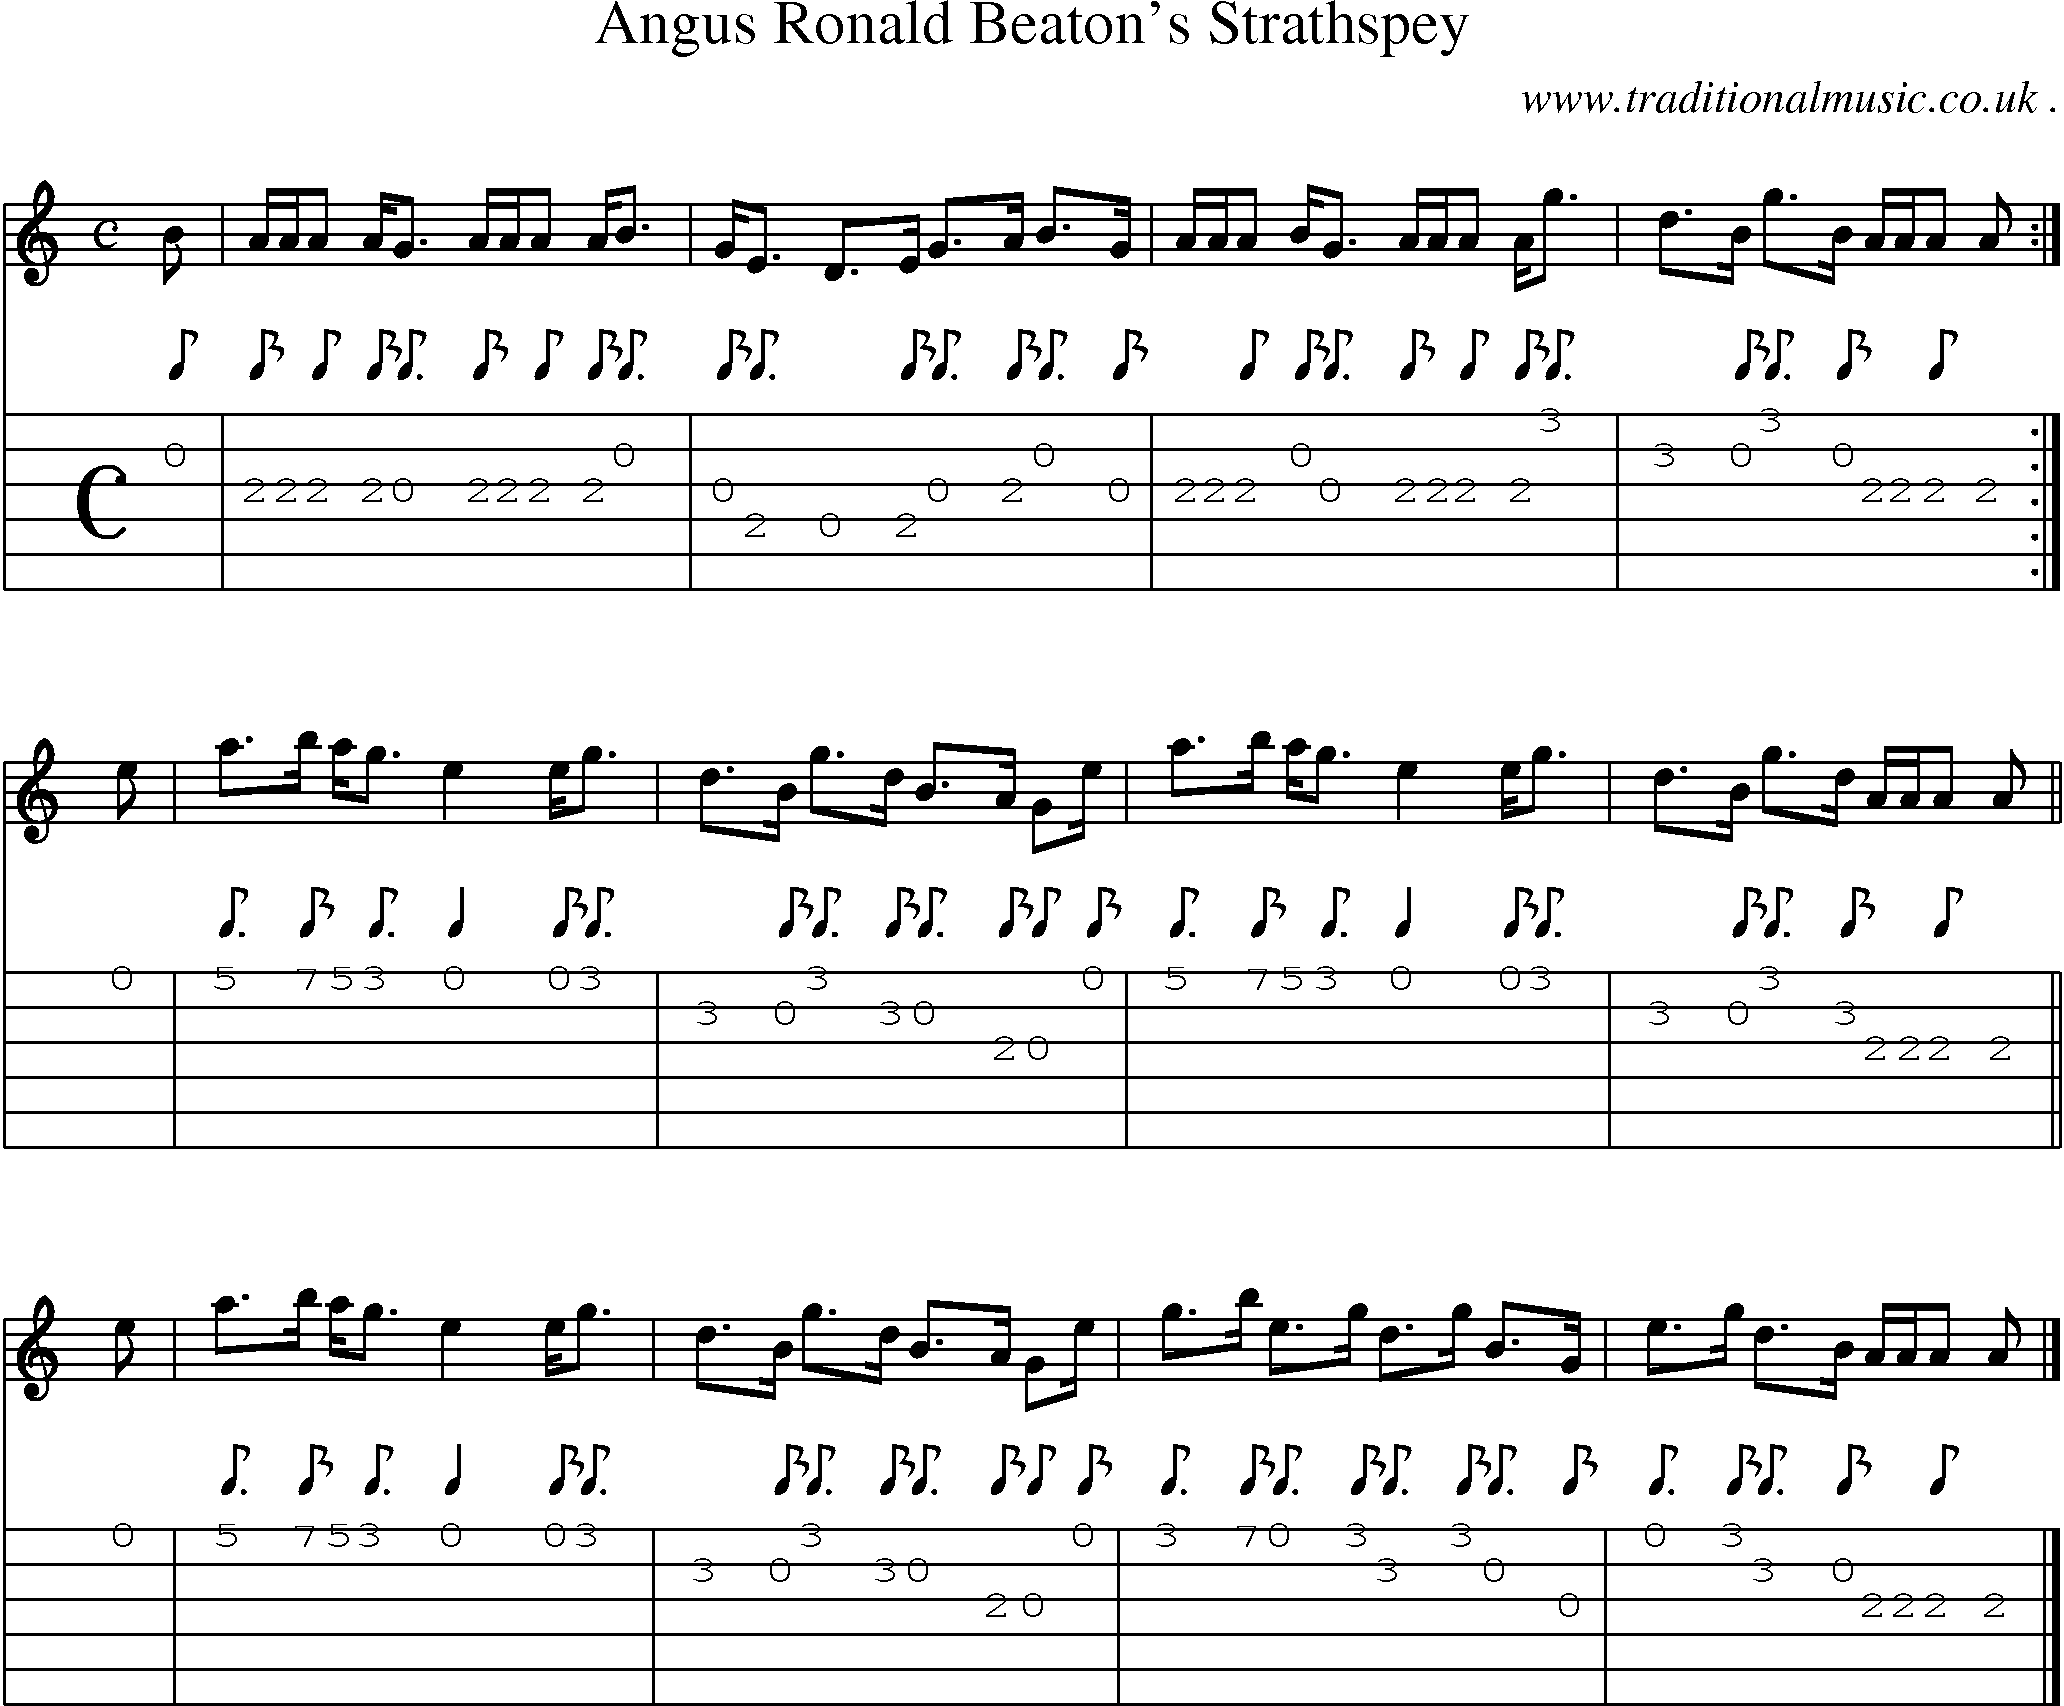 Sheet-music  score, Chords and Guitar Tabs for Angus Ronald Beatons Strathspey